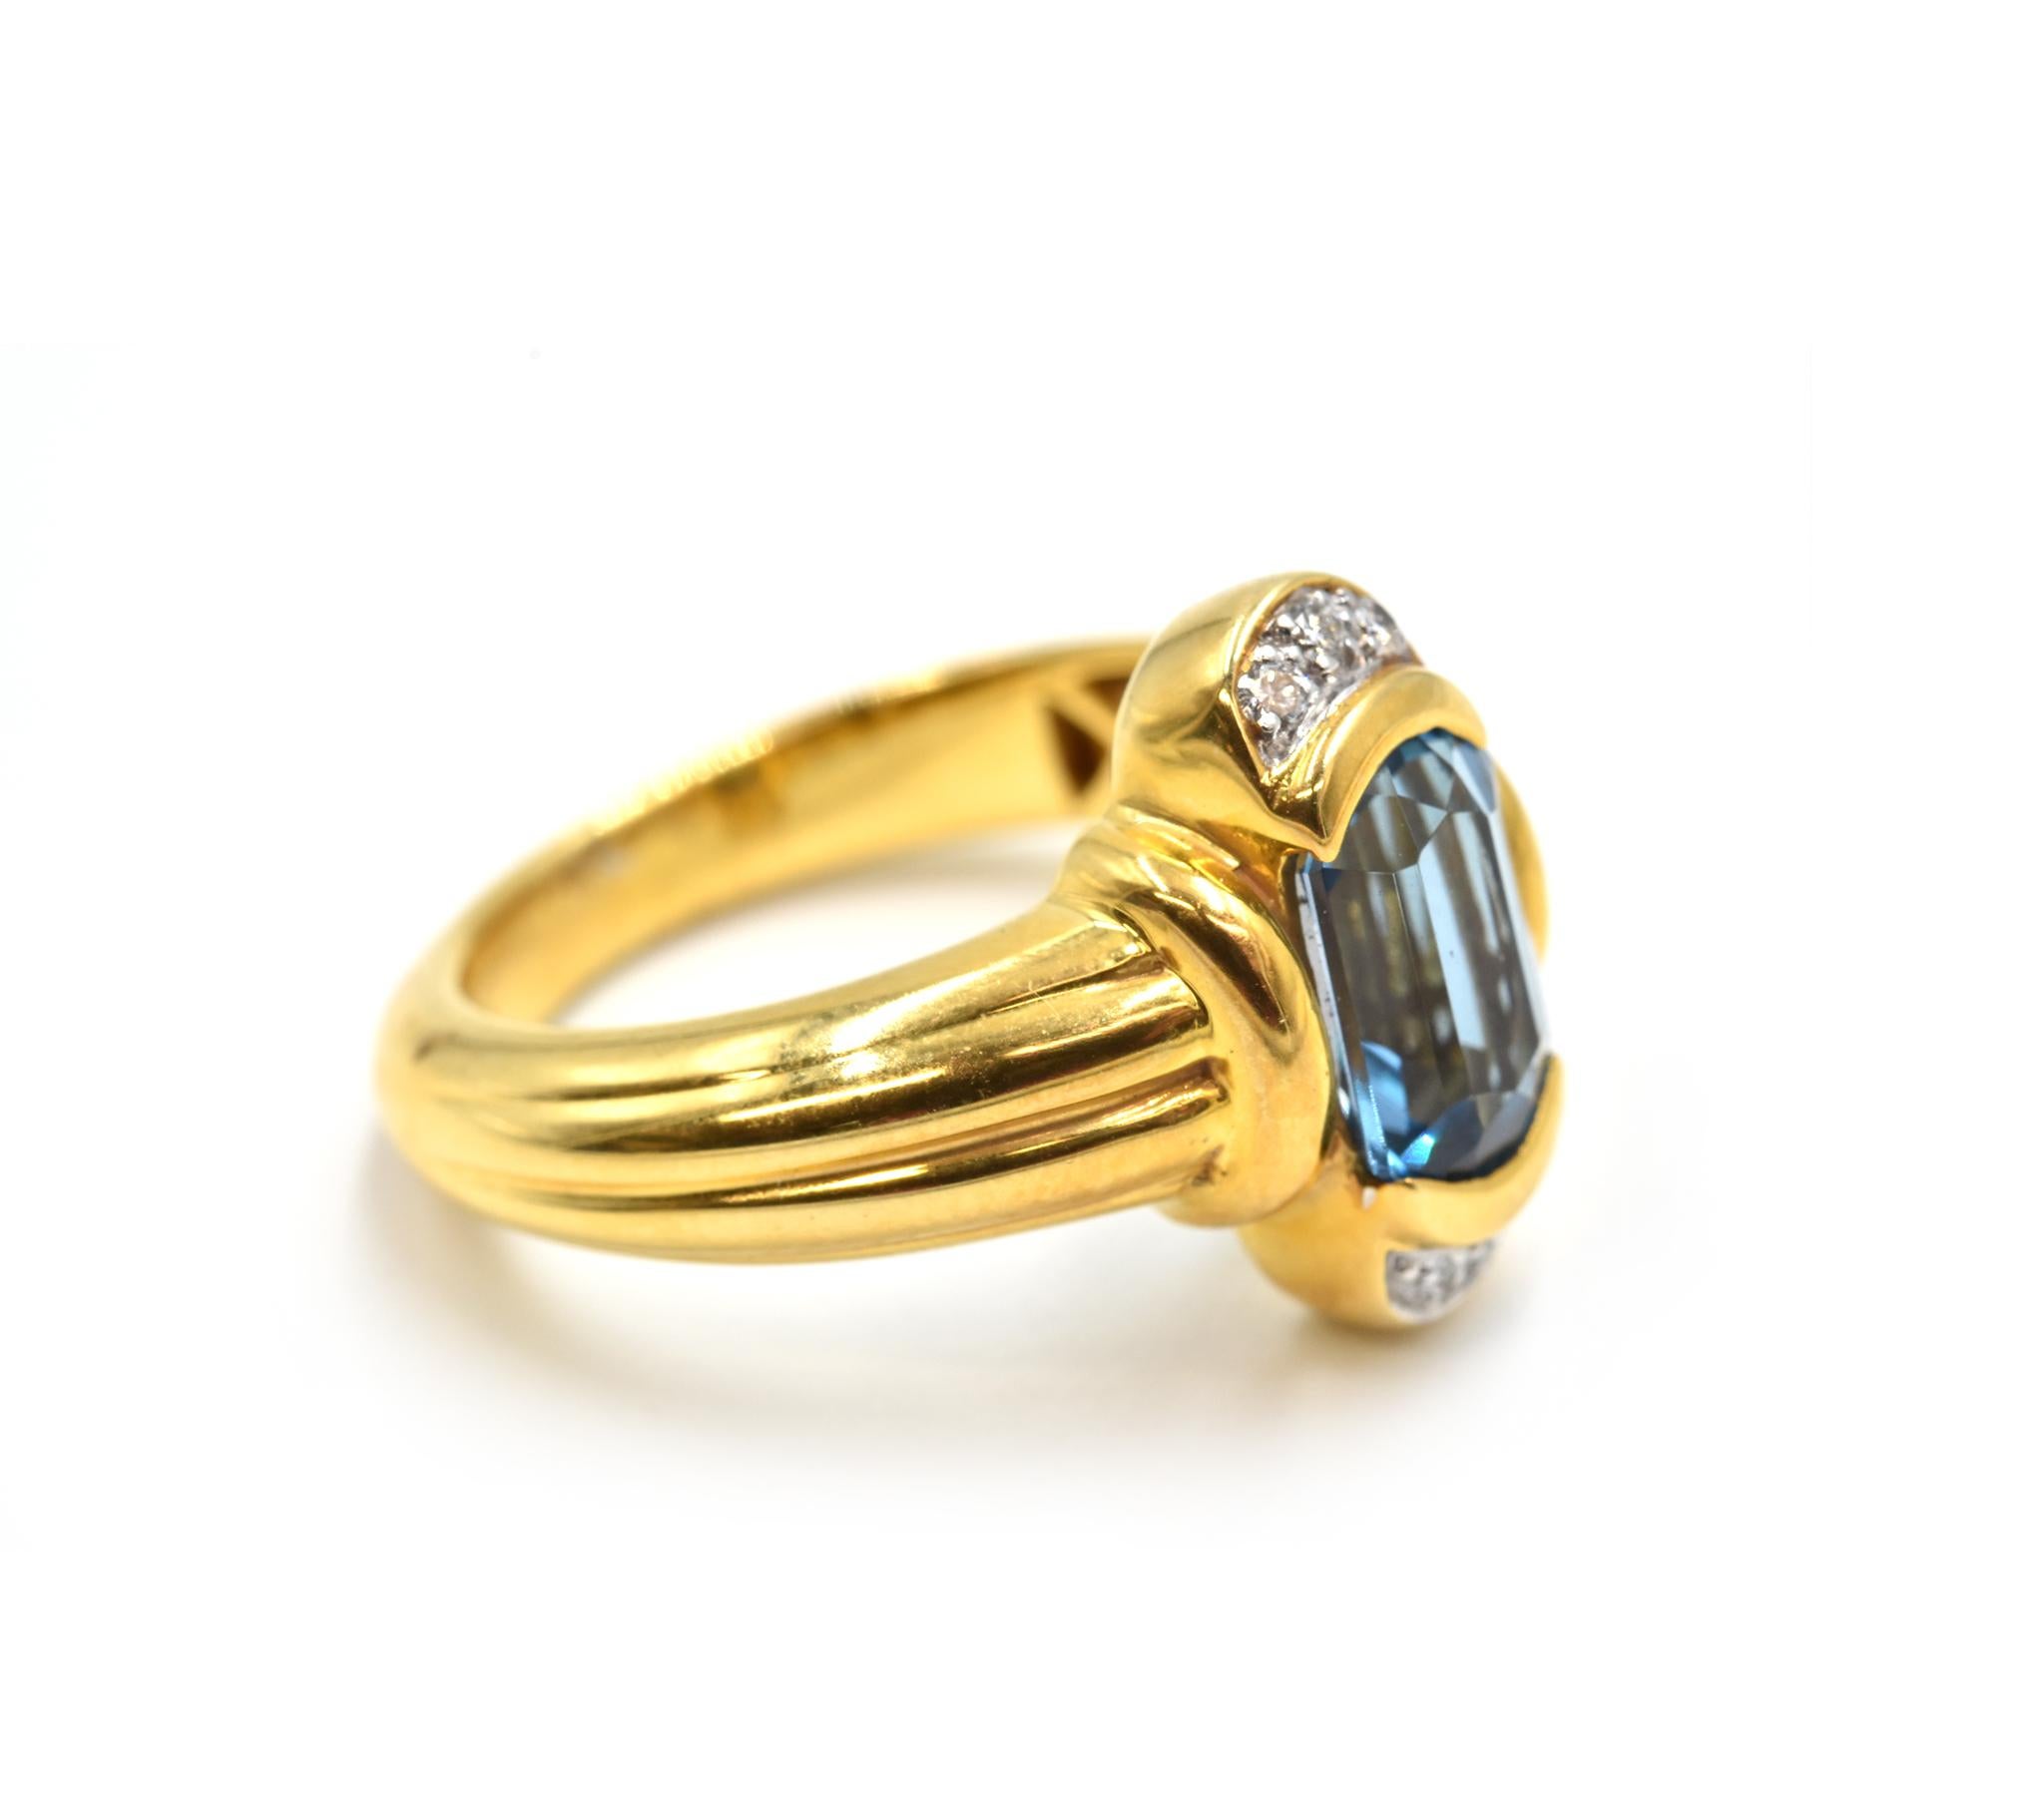 Designer: custom design
Material: 18k yellow gold
Blue Topaz: one 1.60 carat blue topaz gemstone
Diamonds: six round brilliant cut diamonds = 0.10 carat weight
Dimensions: ring top measures 1/4-inch long
Ring Size: 6 1/4 (please allow two additional